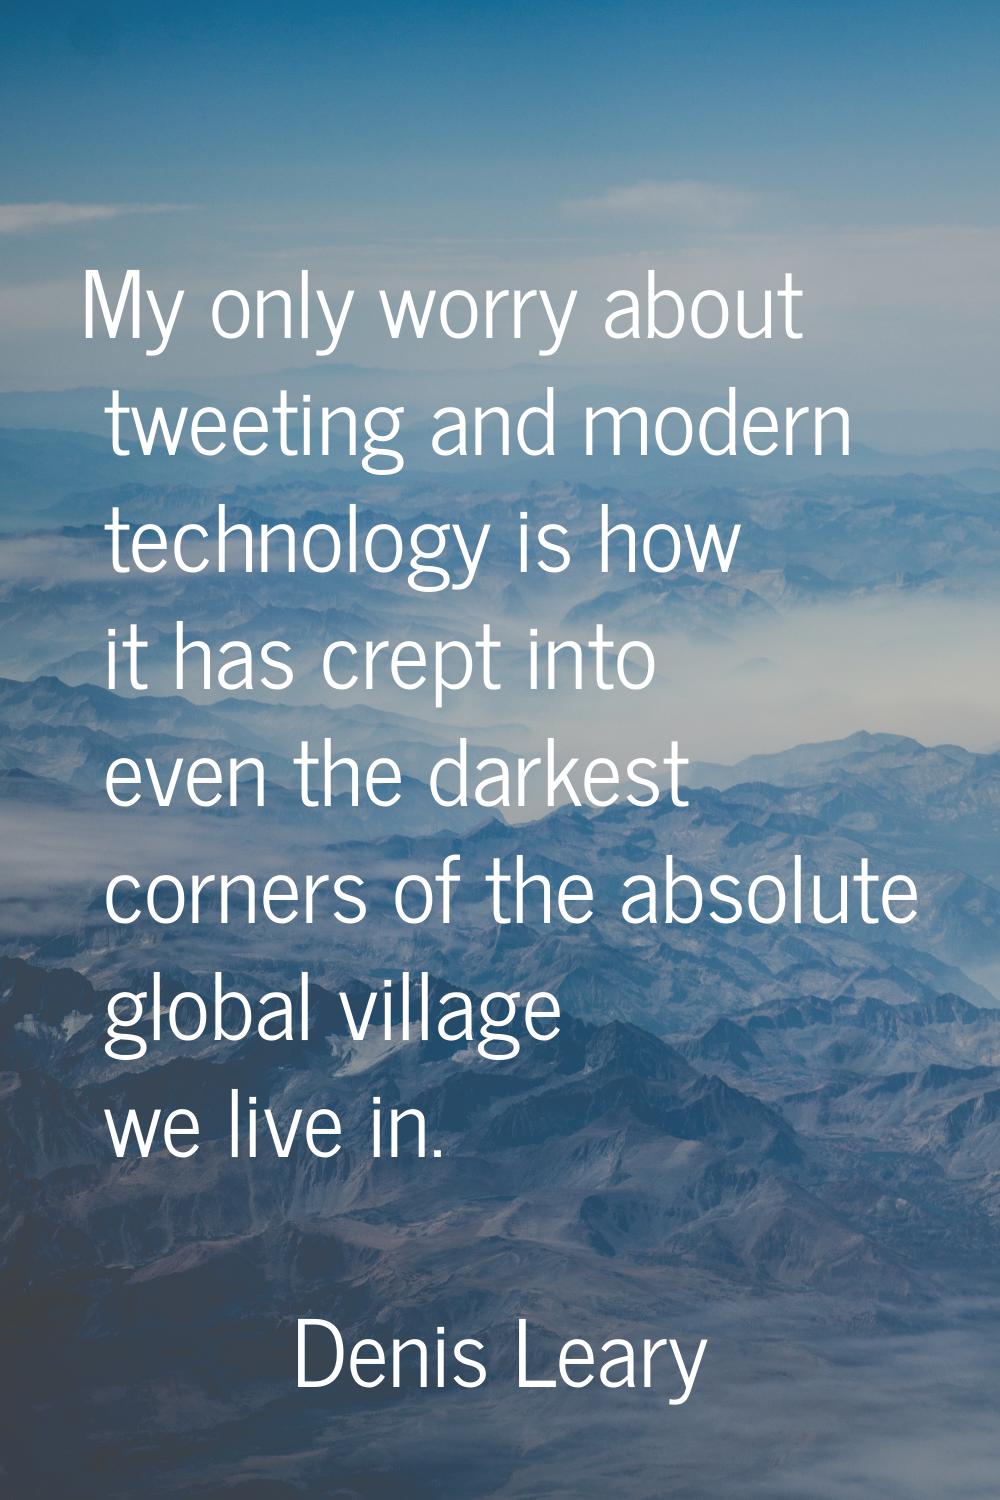 My only worry about tweeting and modern technology is how it has crept into even the darkest corner